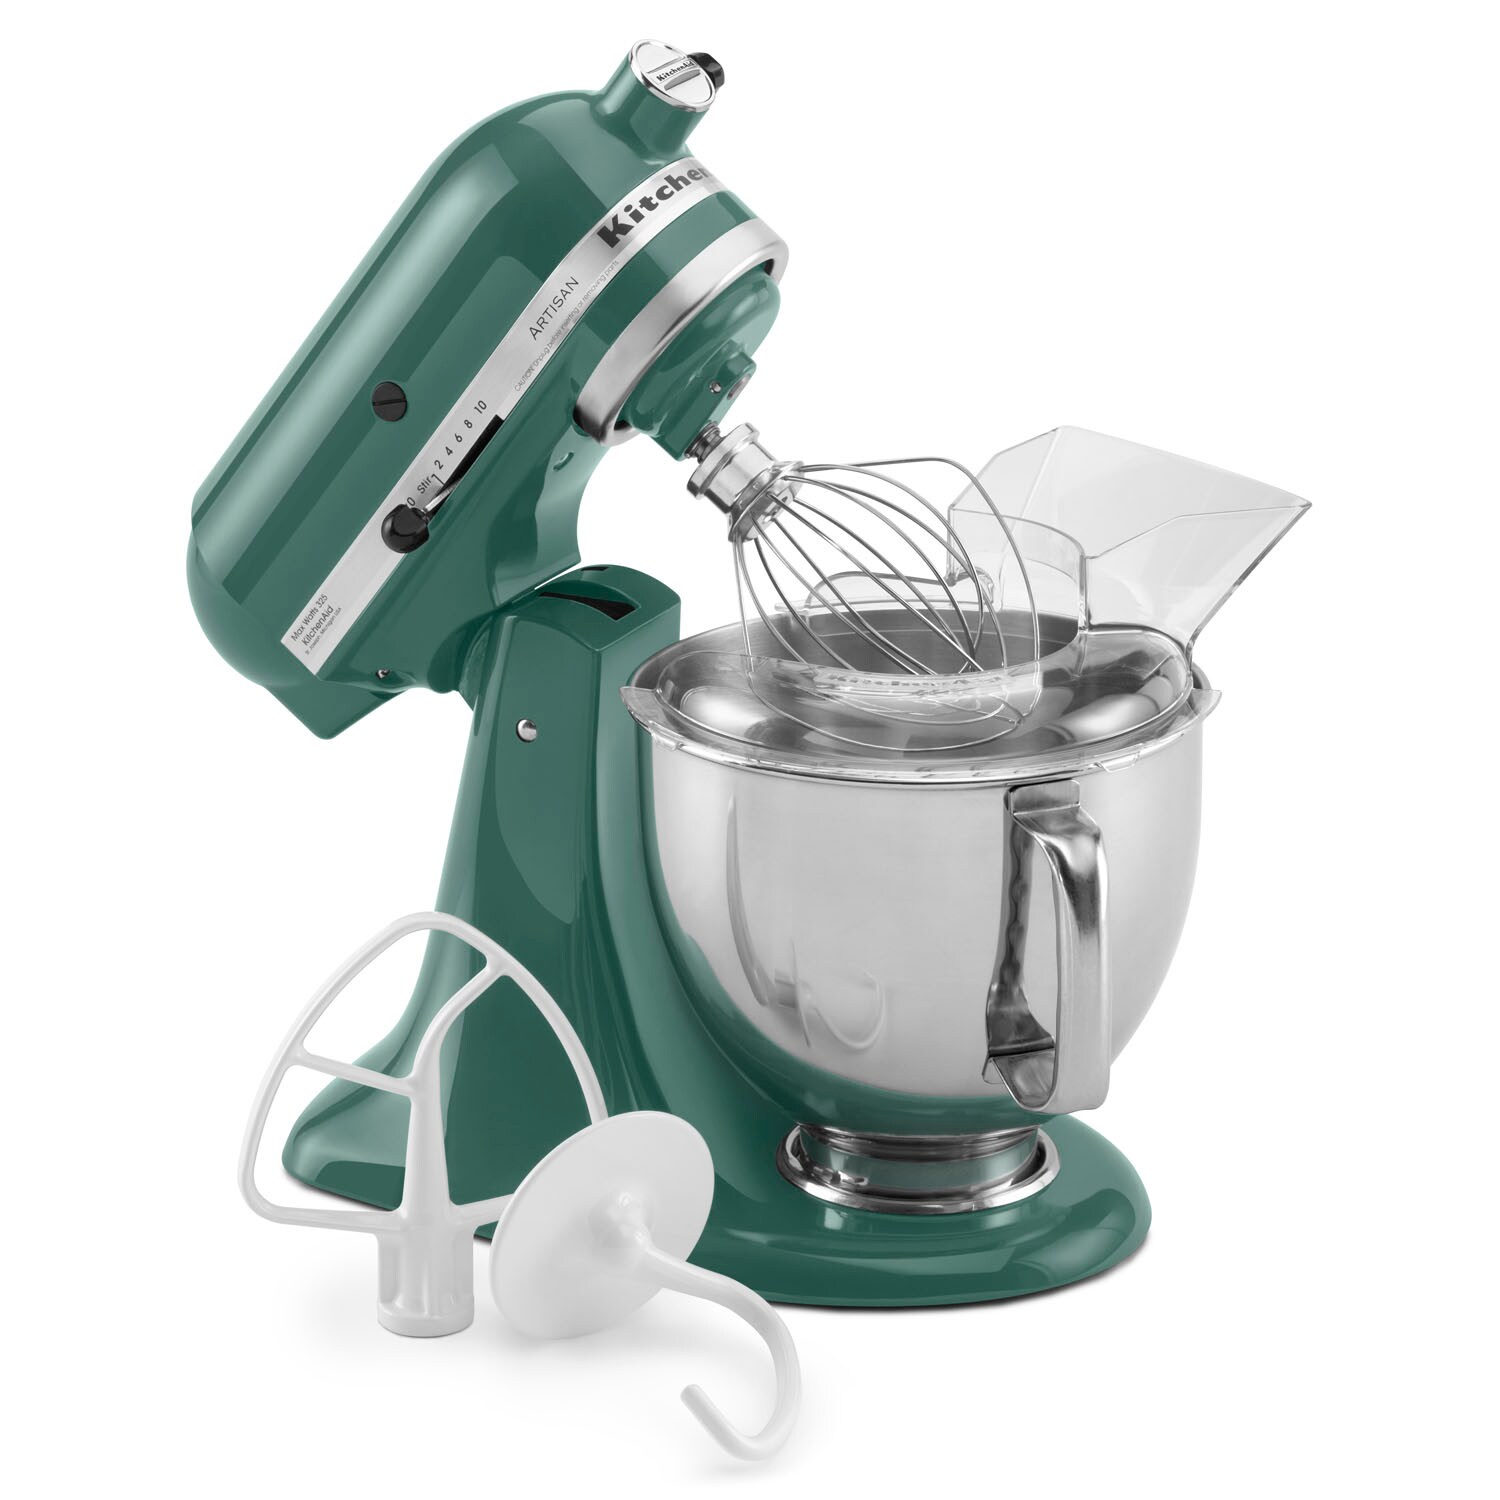  KitchenAid KSM150PSGA Artisan Series 5-Qt. Stand Mixer with  Pouring Shield - Green Apple: Electric Stand Mixers: Home & Kitchen